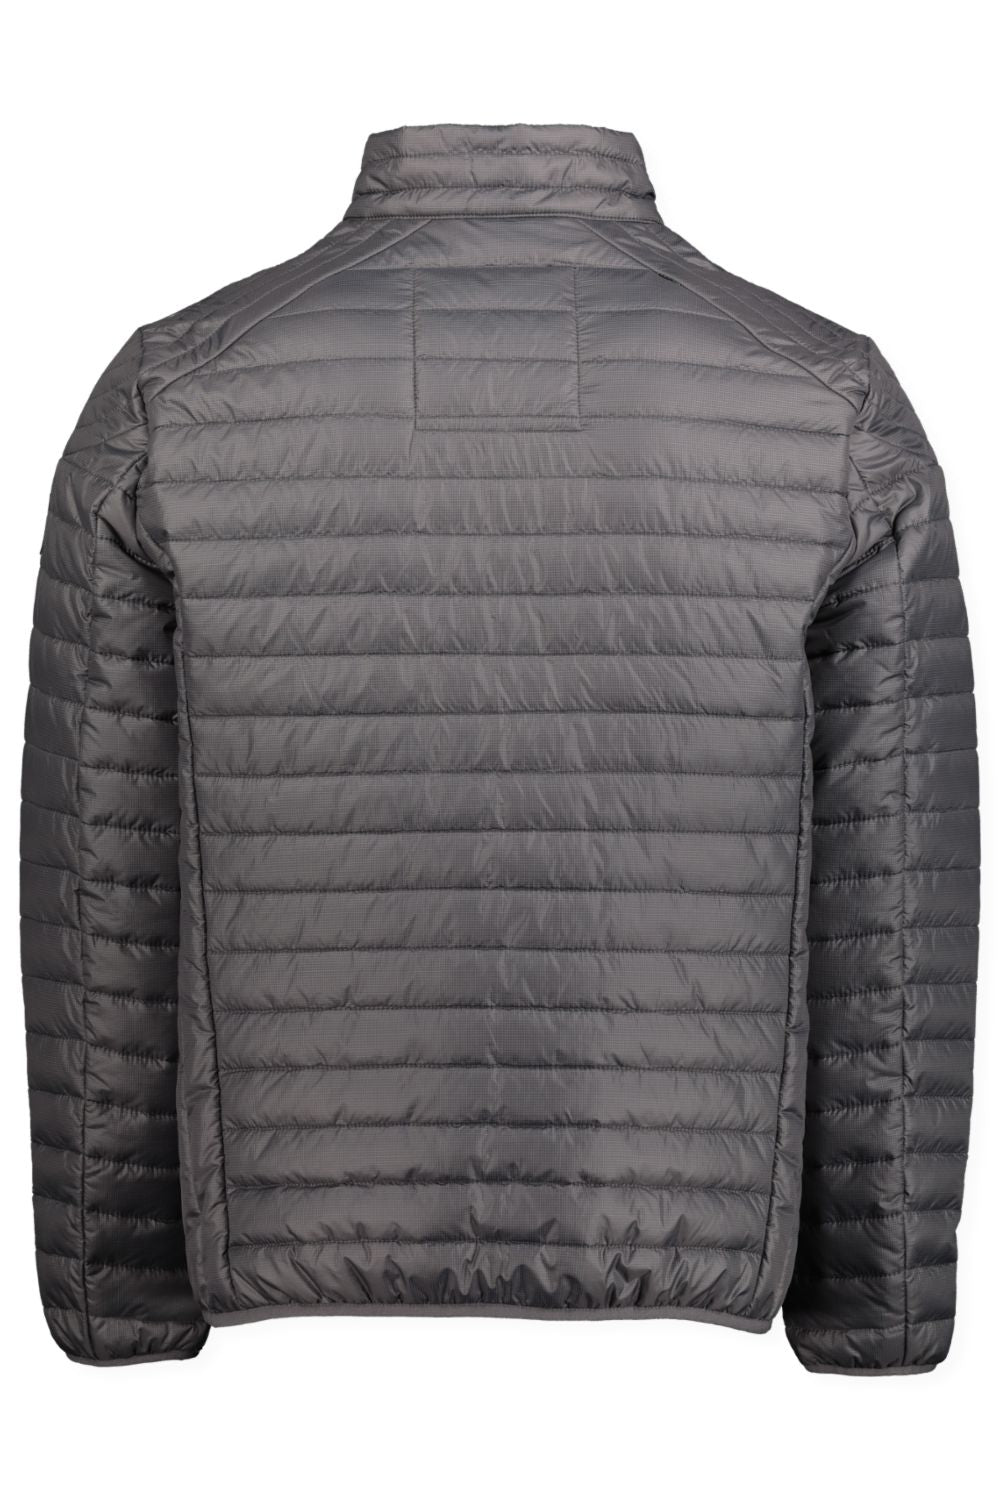 S4 Grey Madboy Reloaded Lightweight Quilted Jacket